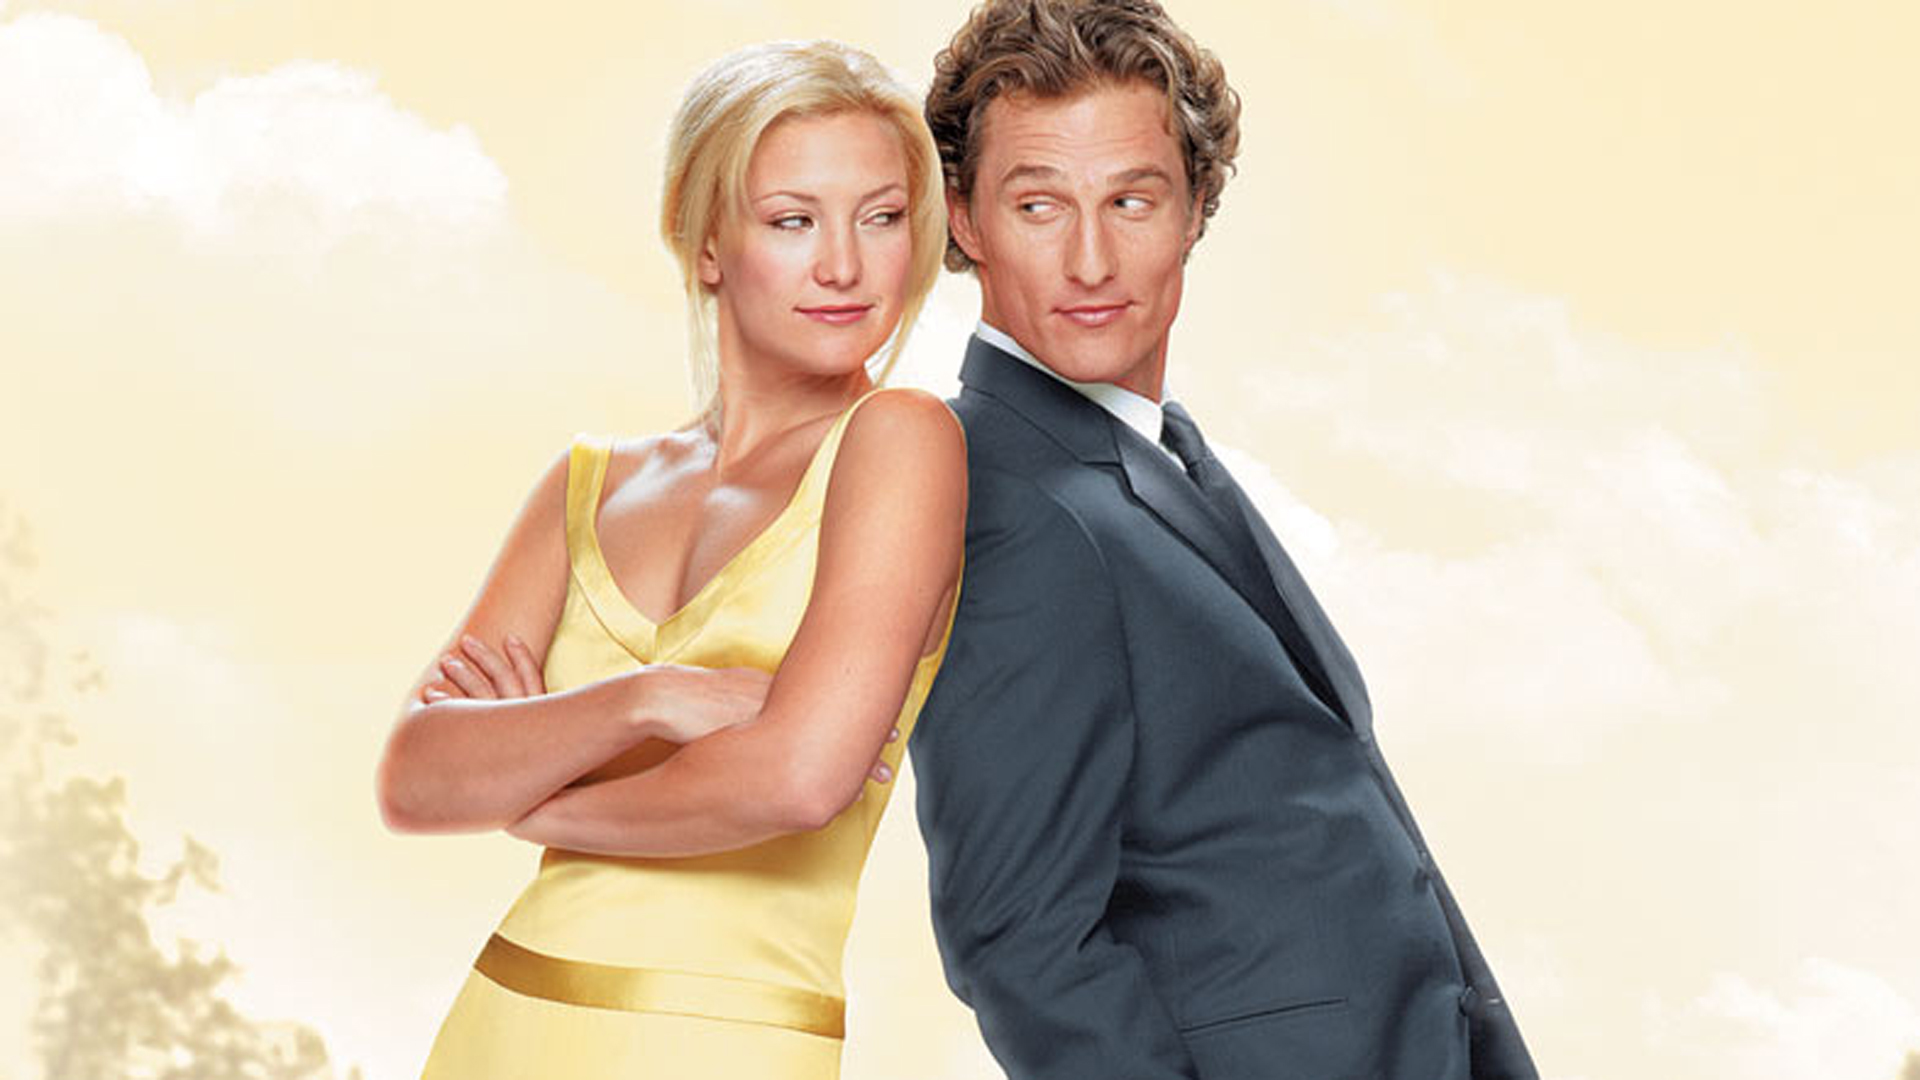 Matthew McConaughey opens up on the 'chemistry' he had with Kate Hudson